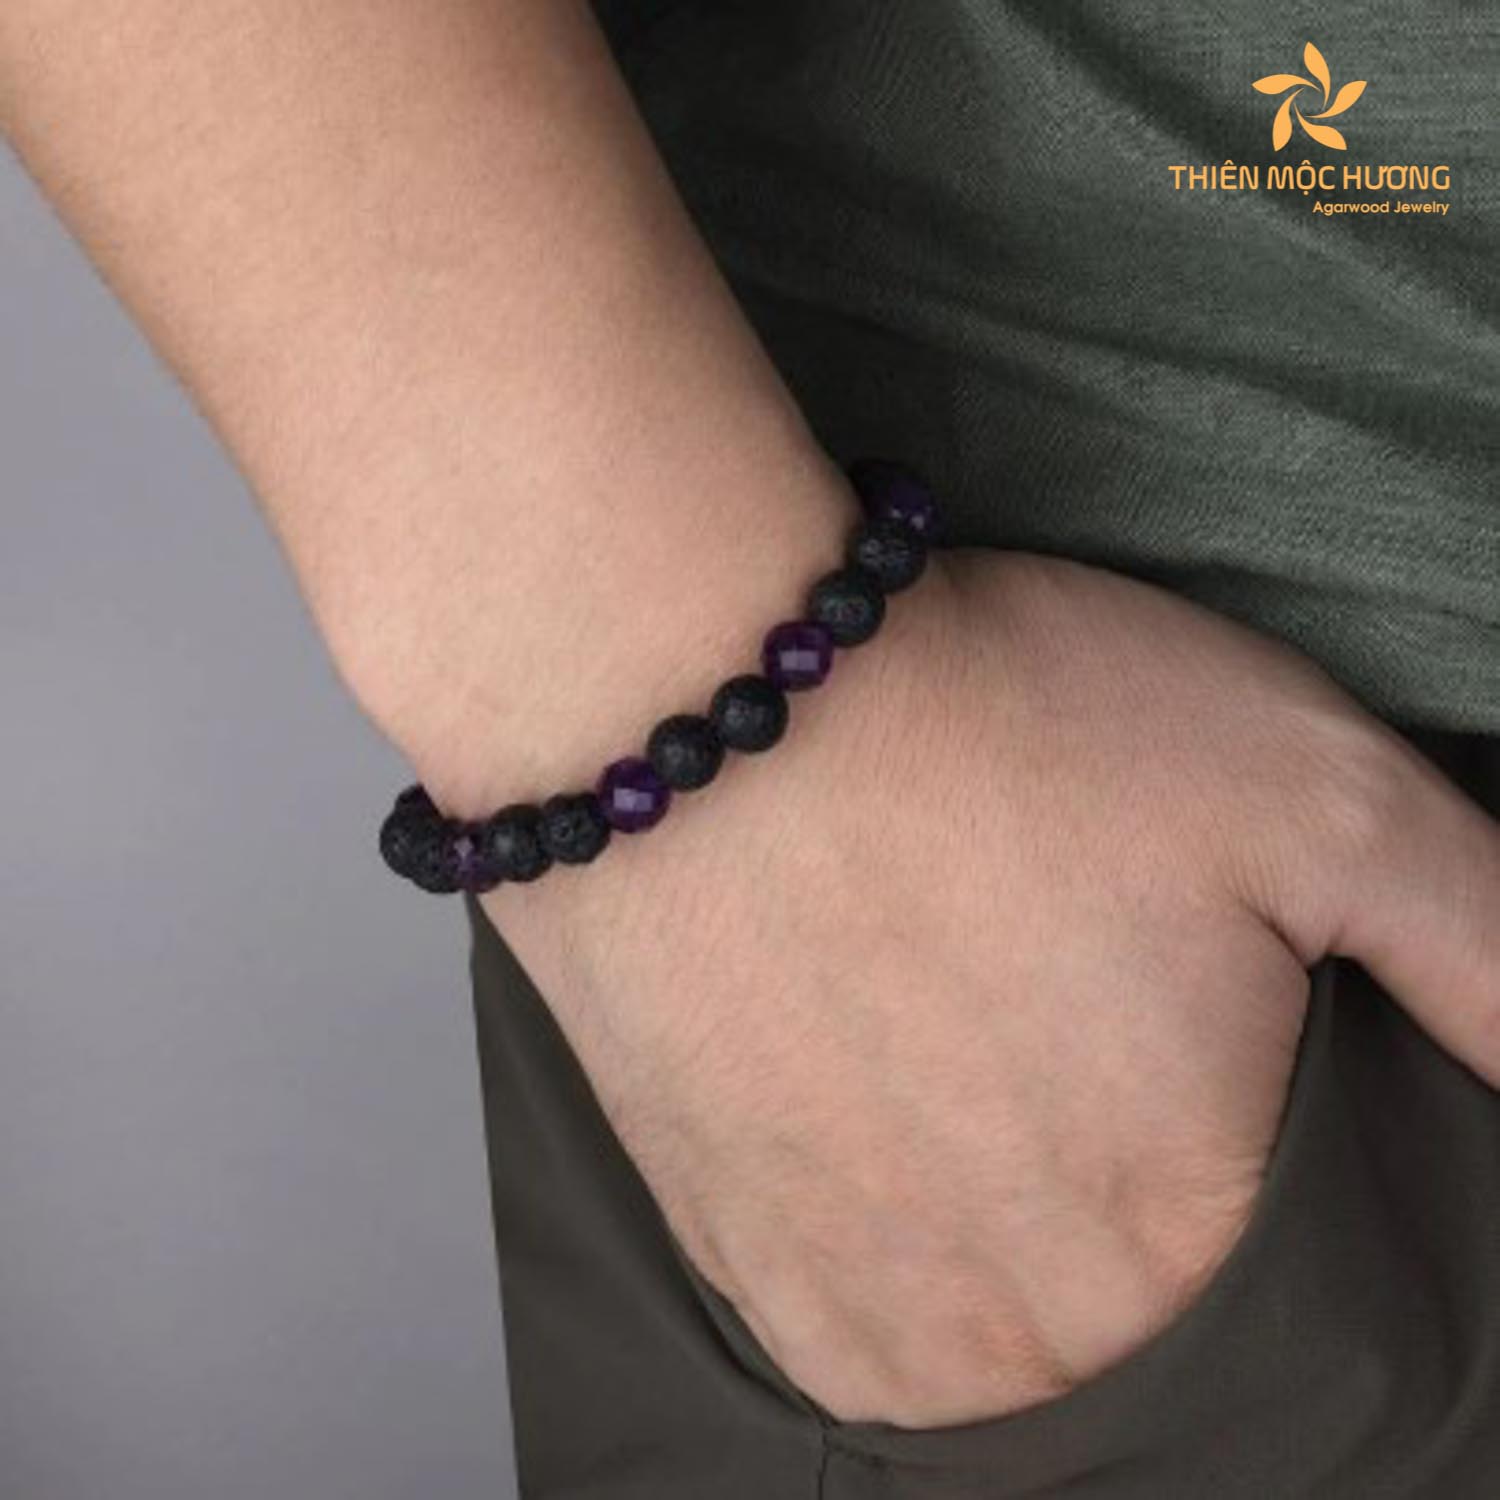 Amethyst men's bracelets are especially trendy right now